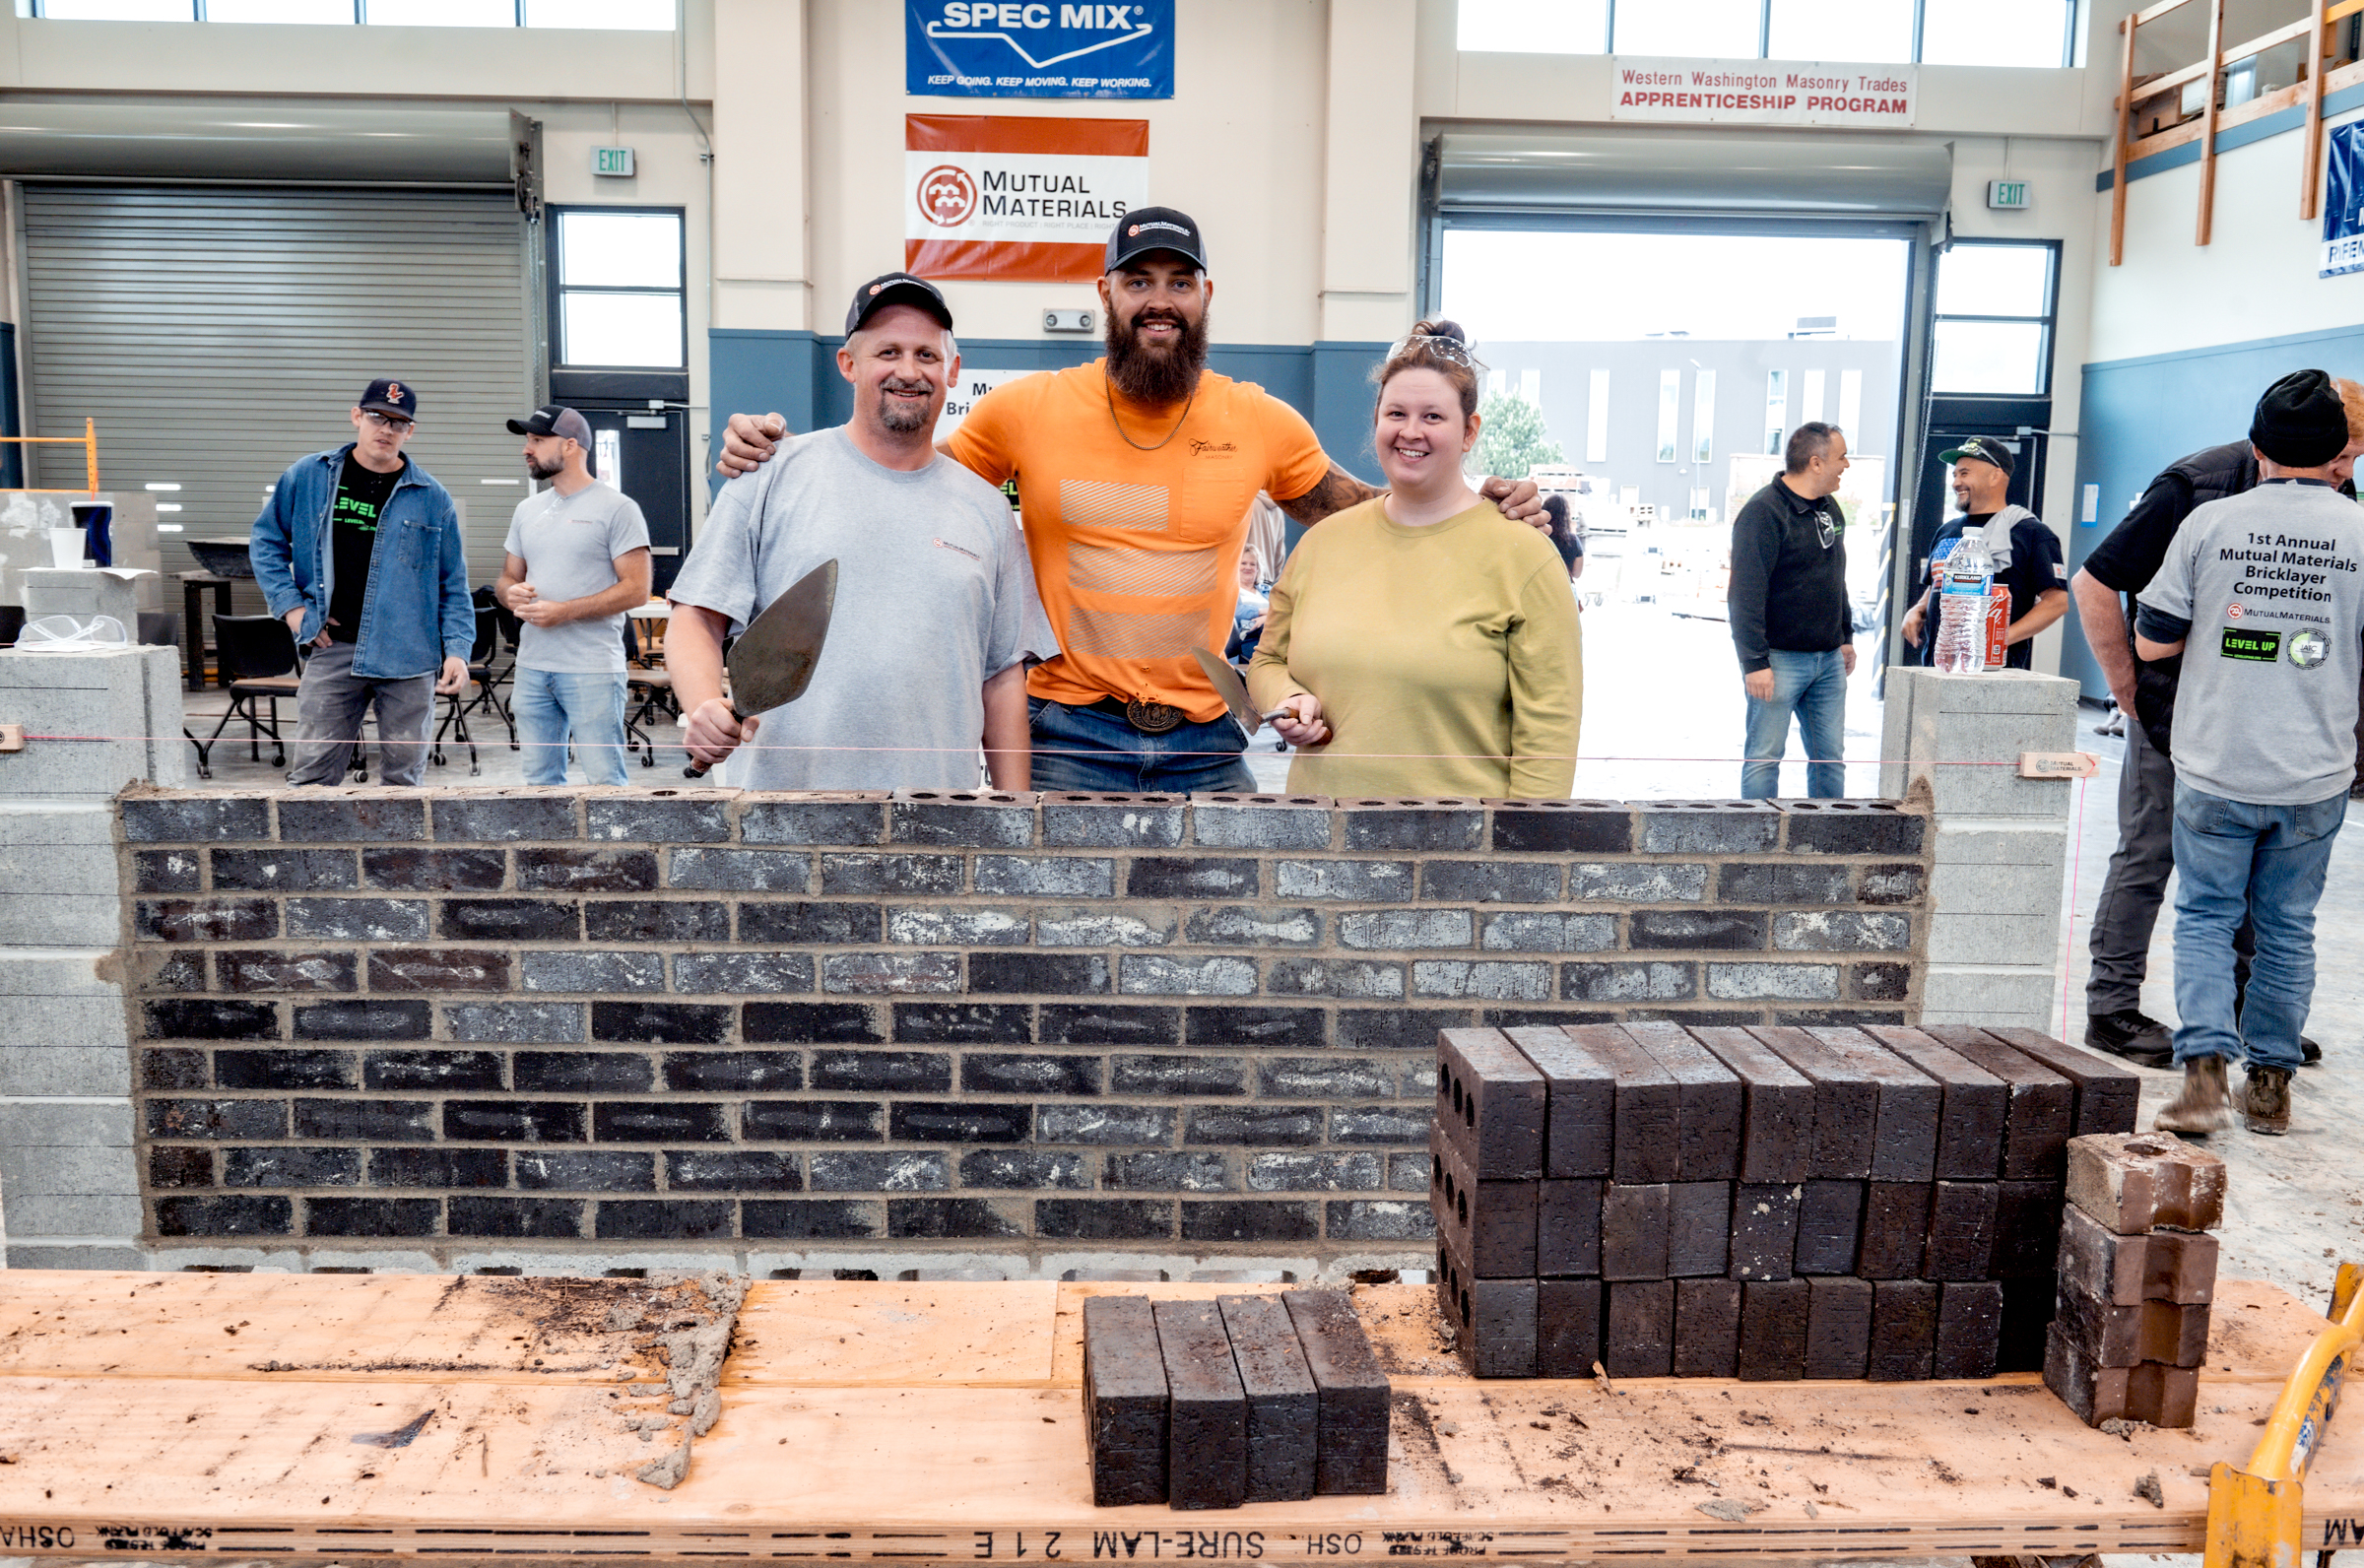 Team poses at Mutual Materials Bricklayer Competition